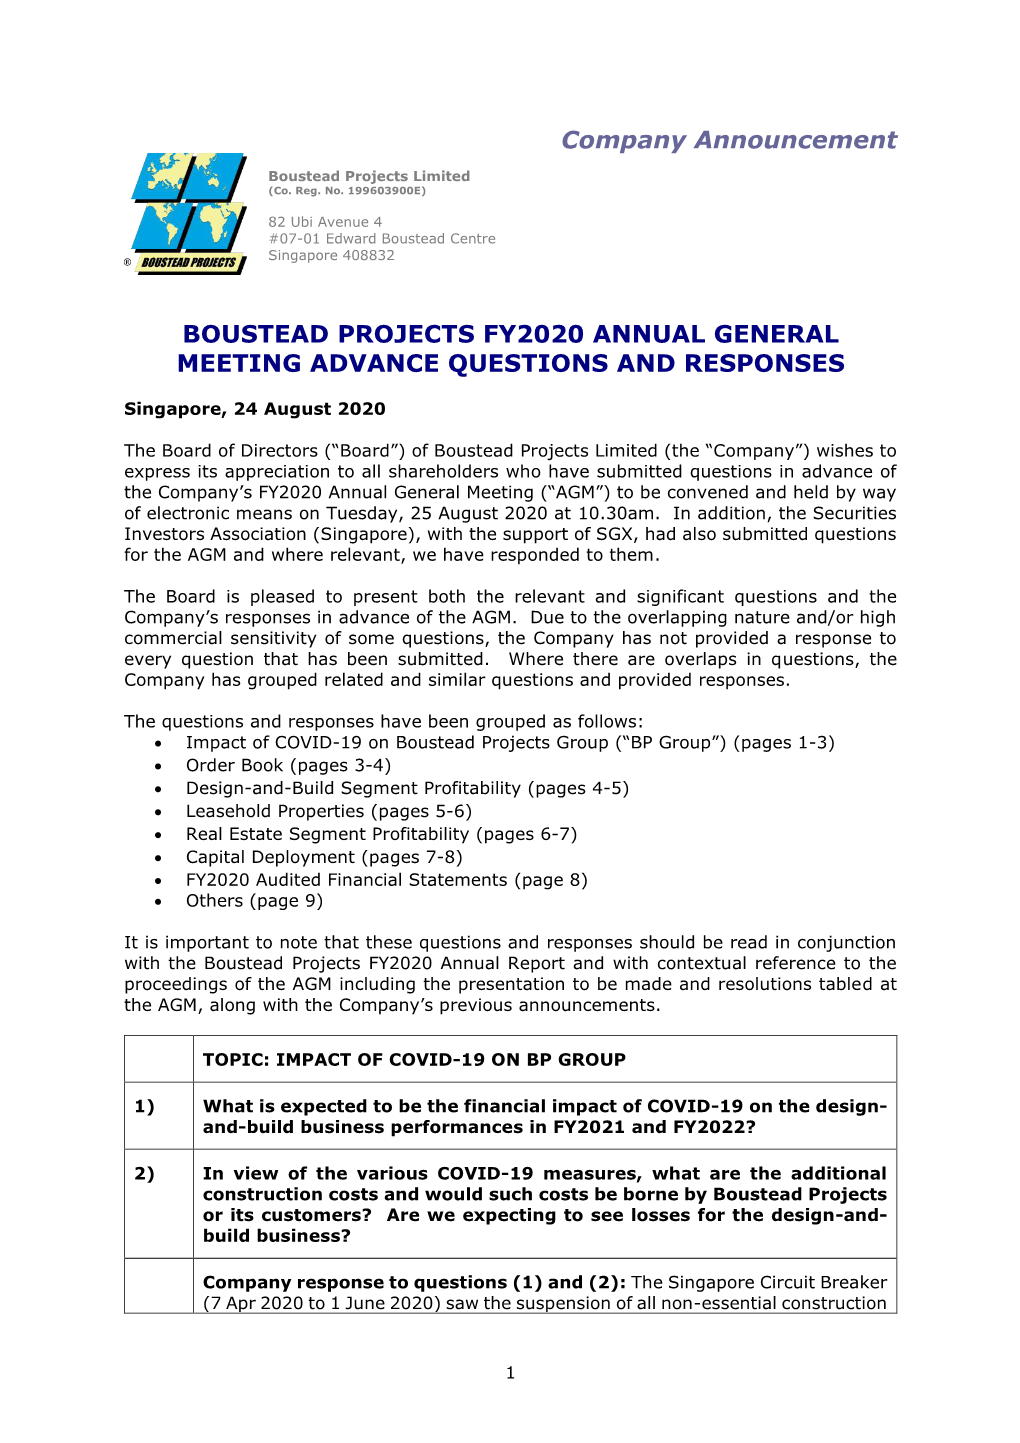 Boustead Projects FY2020 AGM Advance Questions and Responses